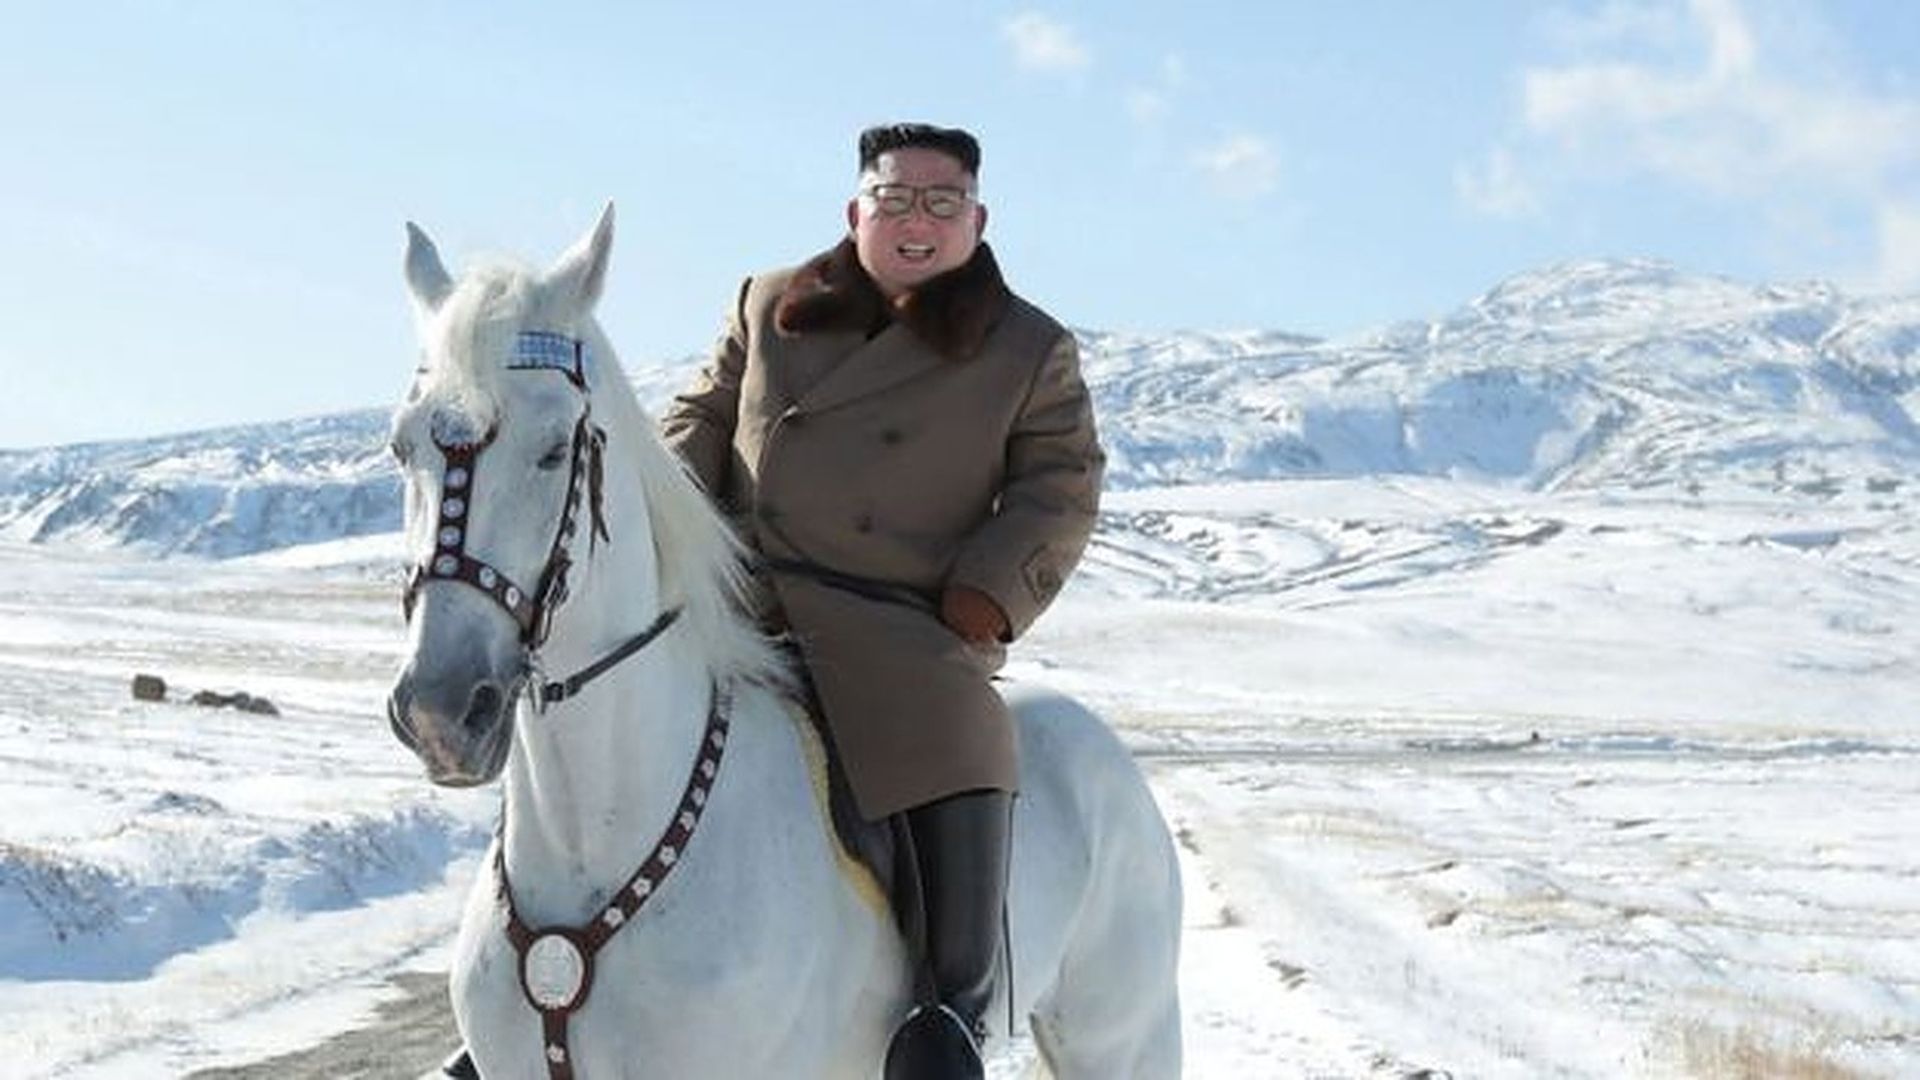 A North Korean state media photo of leader Kim Jong-un atop a white horse in the snow in North Korea.